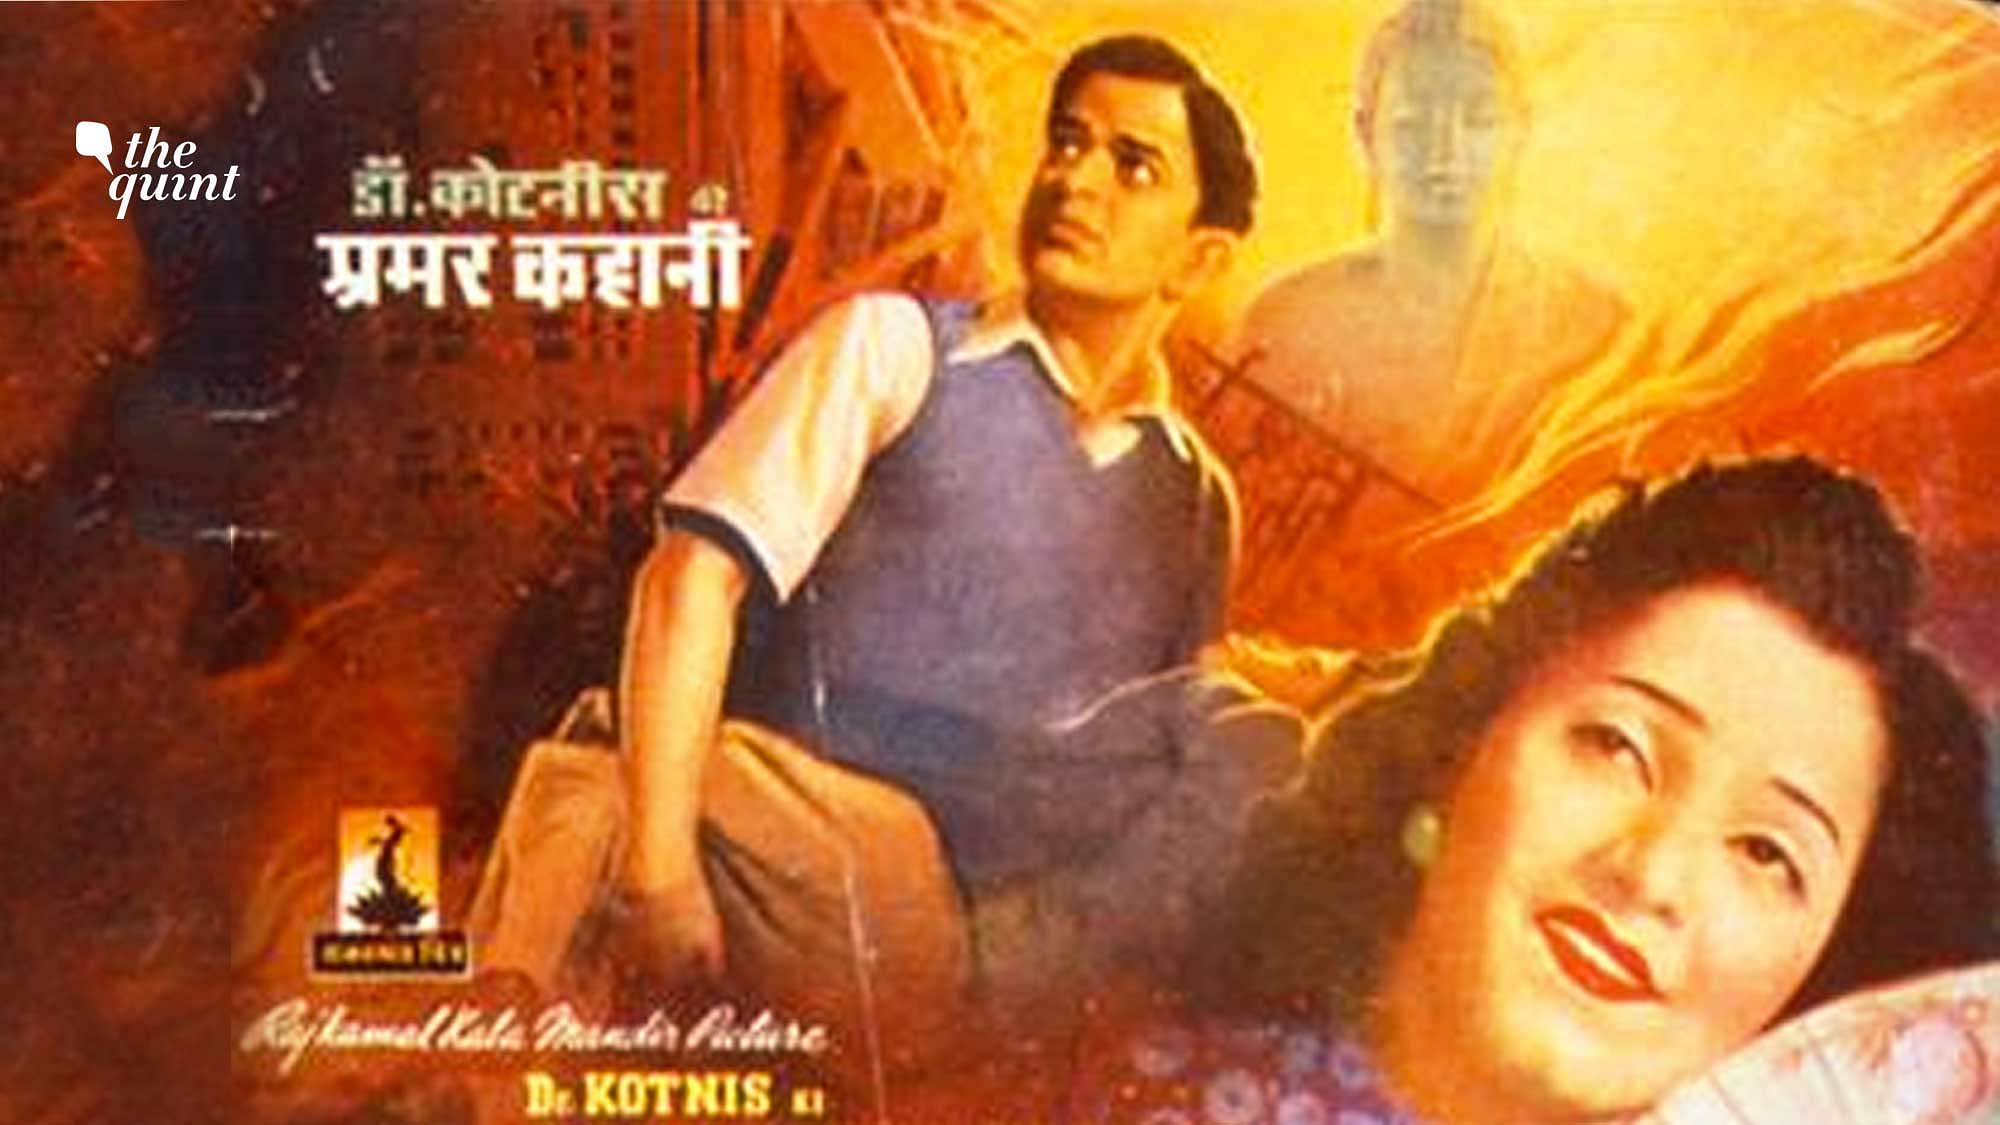 Poster of cult film on doctors, ‘Dr Kotnis Ki Amar Kahani’ (1946) – an iconic film made and acted by the legendary V Shantaram. Image used for representation.